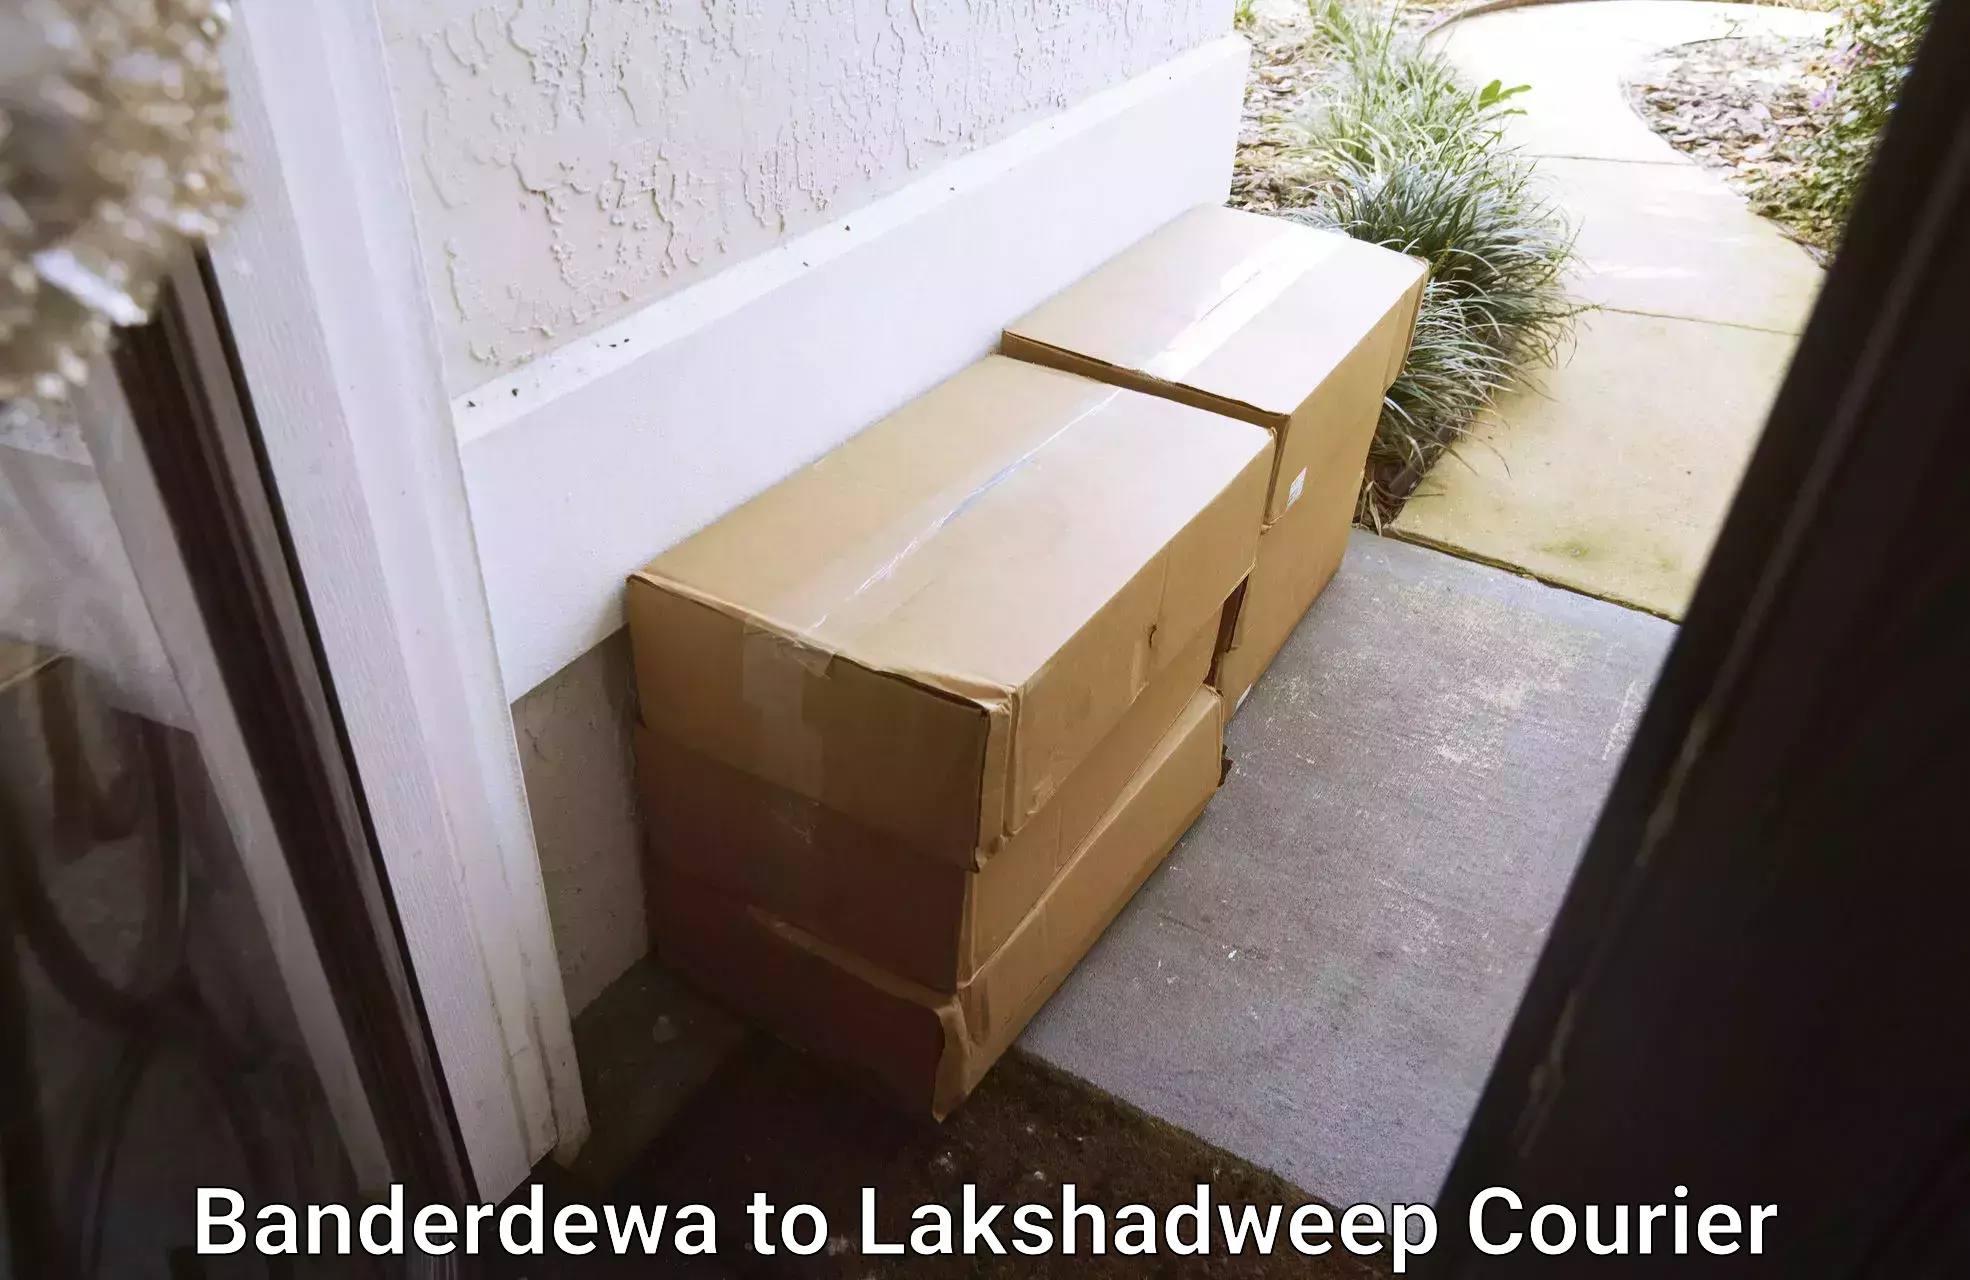 Full-service courier options Banderdewa to Lakshadweep